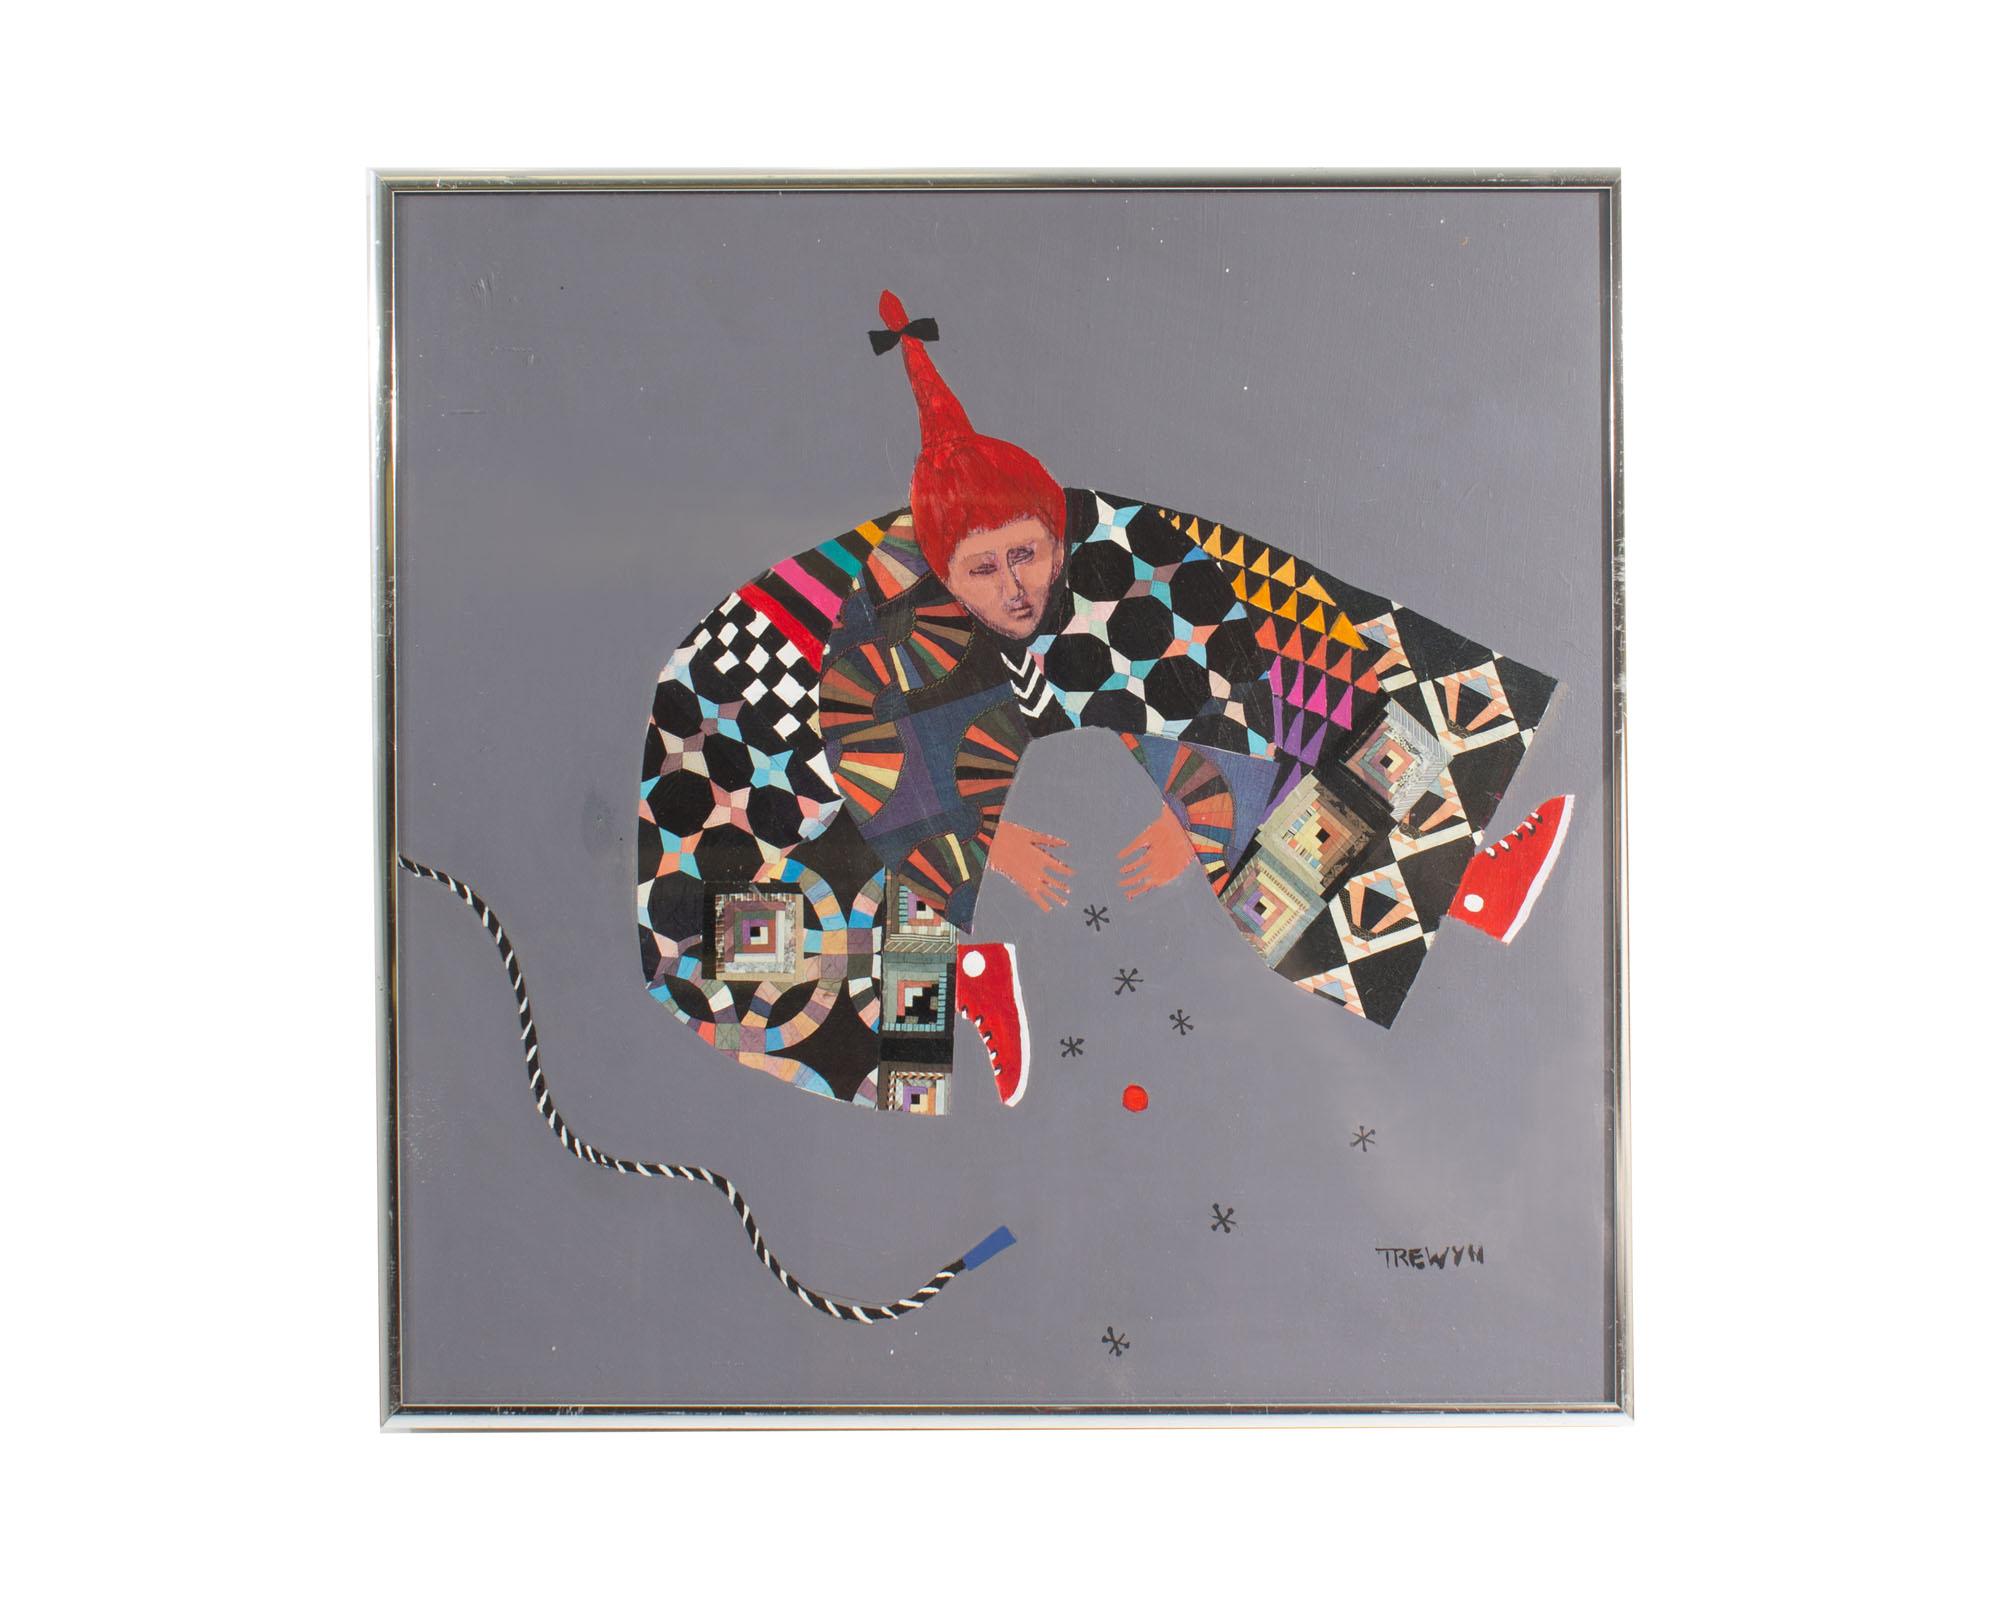 A 1990 mixed media abstract painting and collage titled, My Life as a Child, by American artist Leslie Trewyn (1941-2017). Signed to the lower right corner, this work features an aerial view of a spirited child in colorful, patterned attire seated